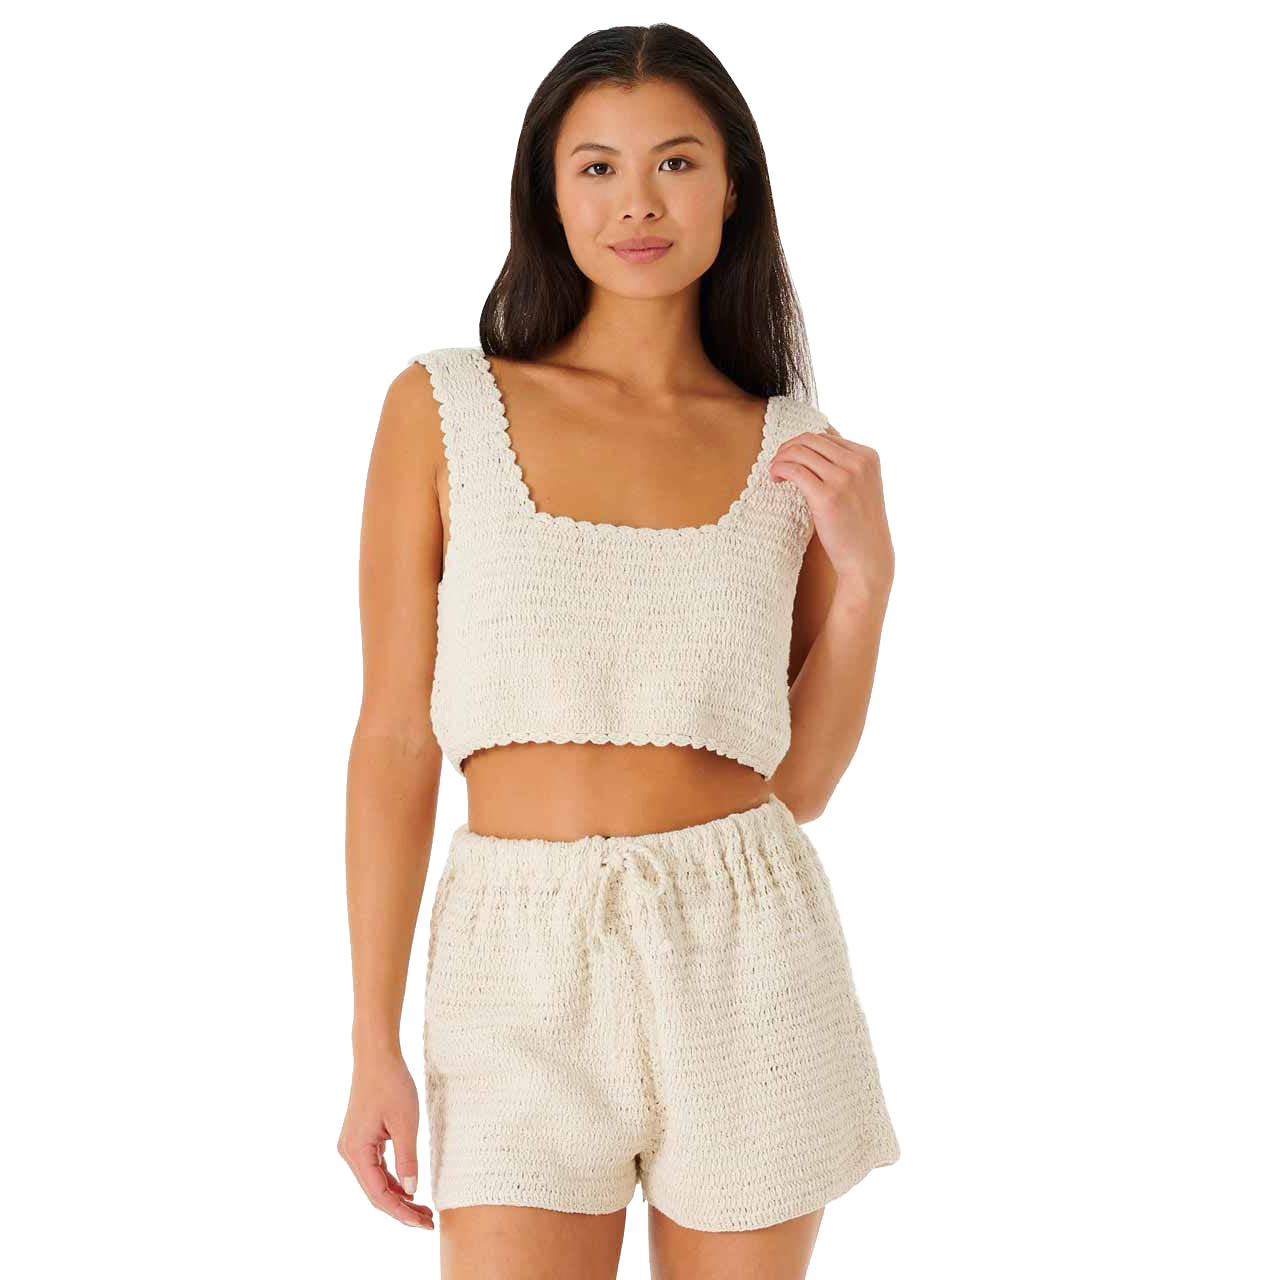 Rip Curl Oceans Together Crochet Top OFF WHITE L